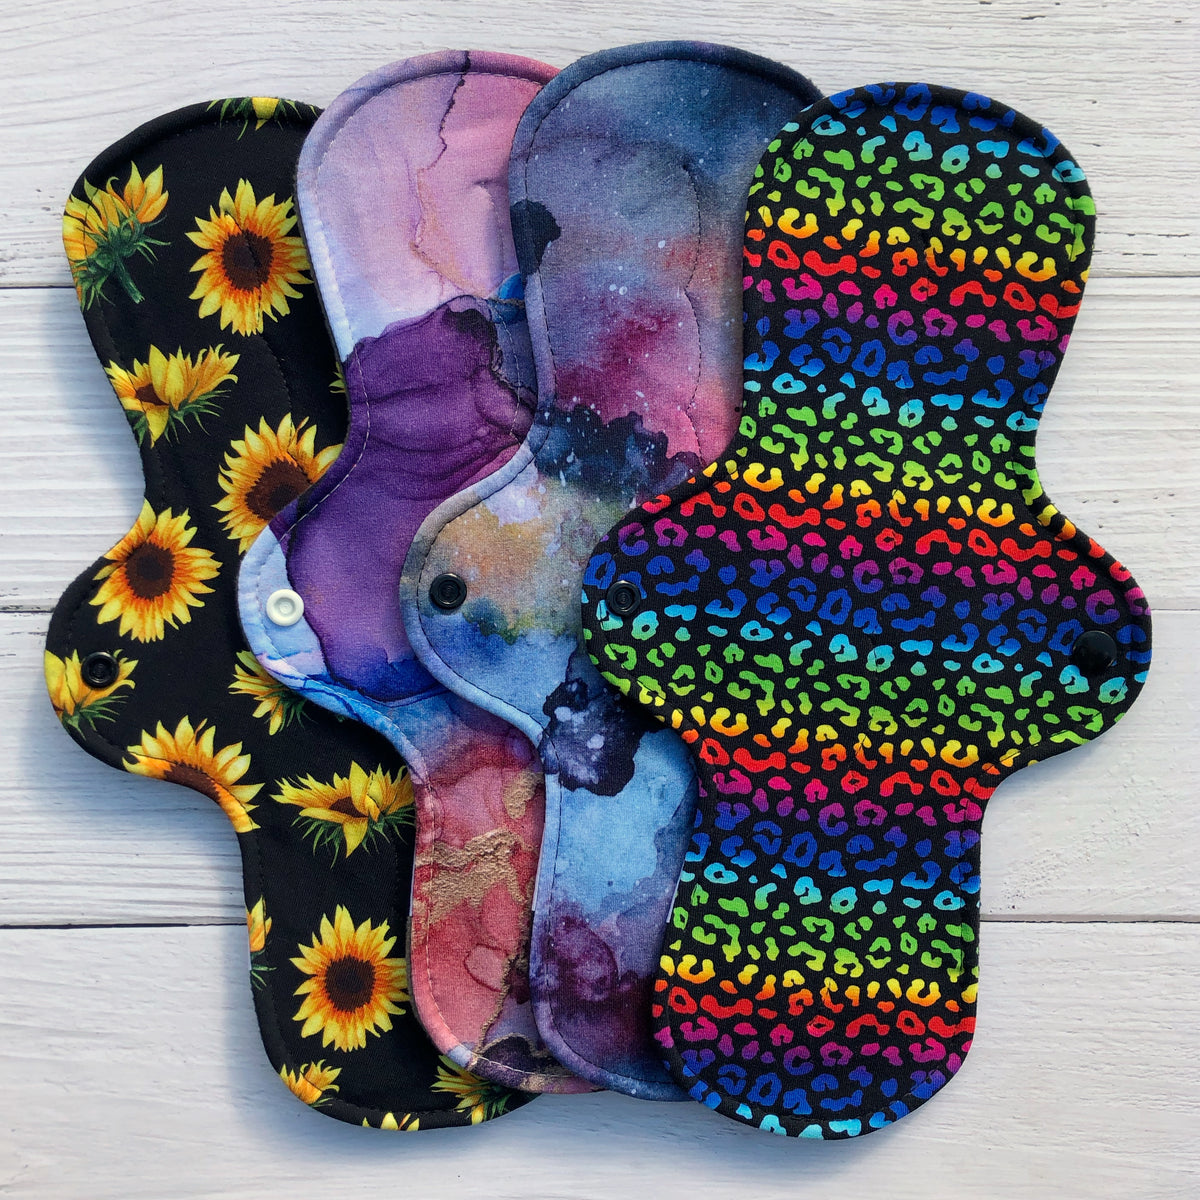 A Beginner's Guide to Using Cloth Pads